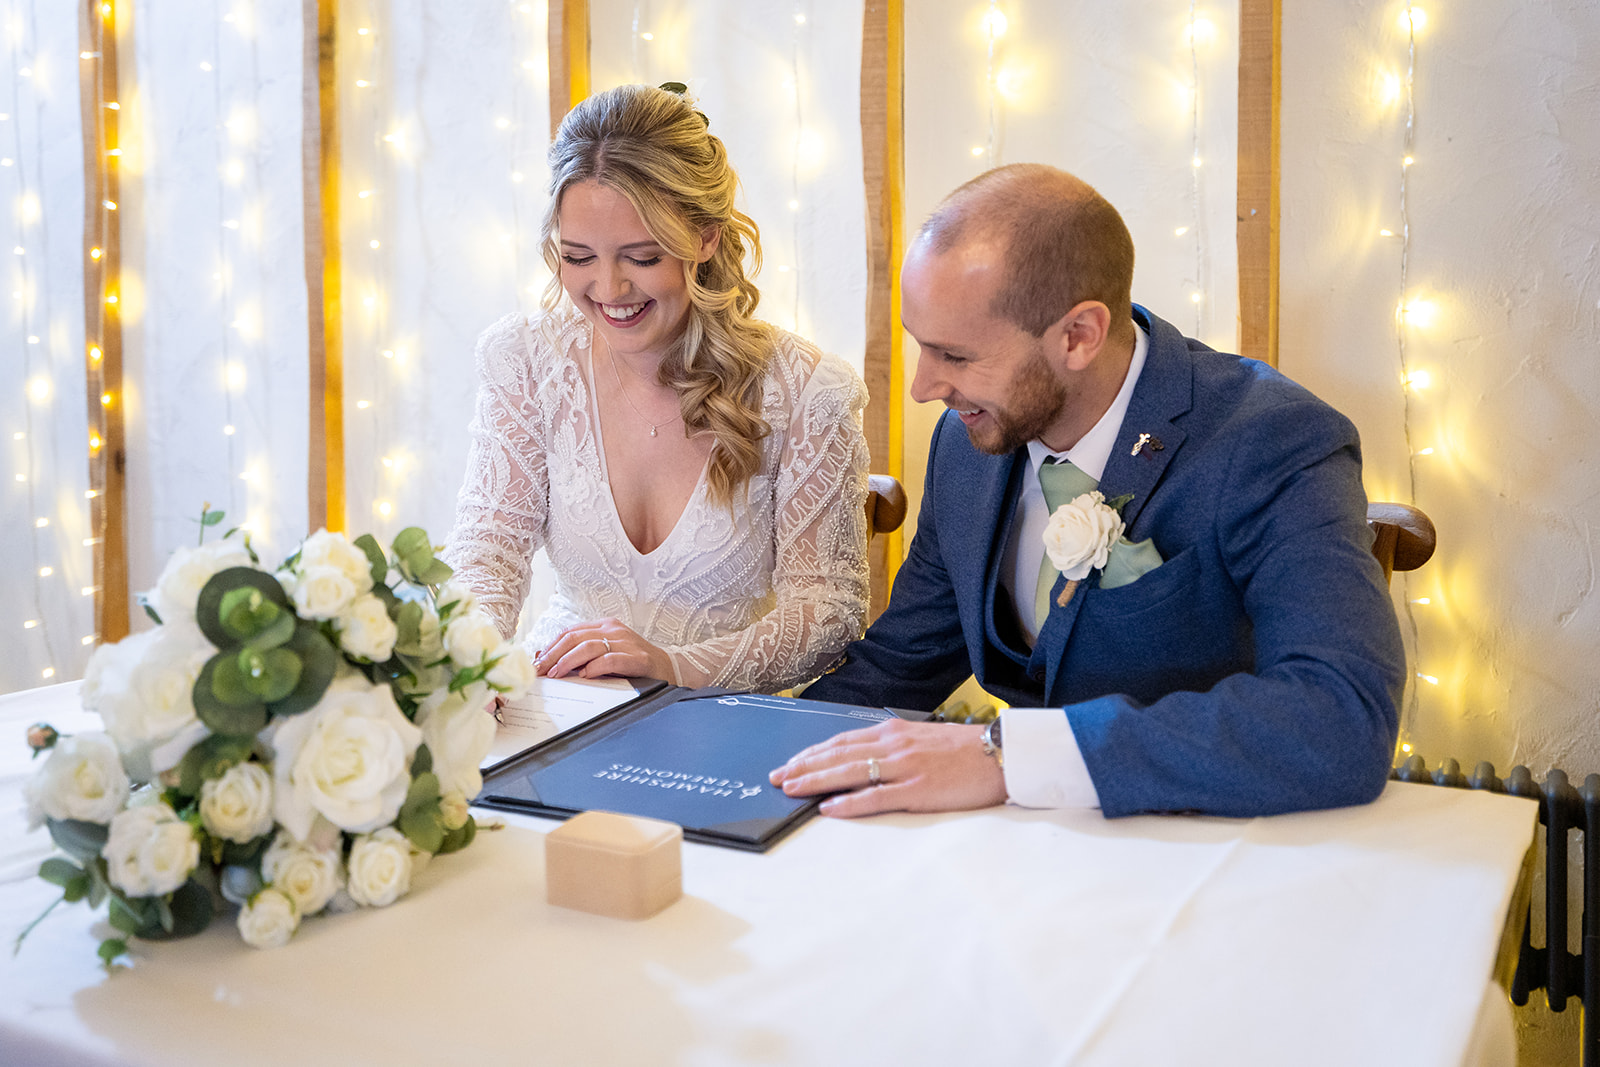 An enchanting pair celebrated their special day at the picturesque Waterside Manor in Romsey, Hampshire, surrounded by t